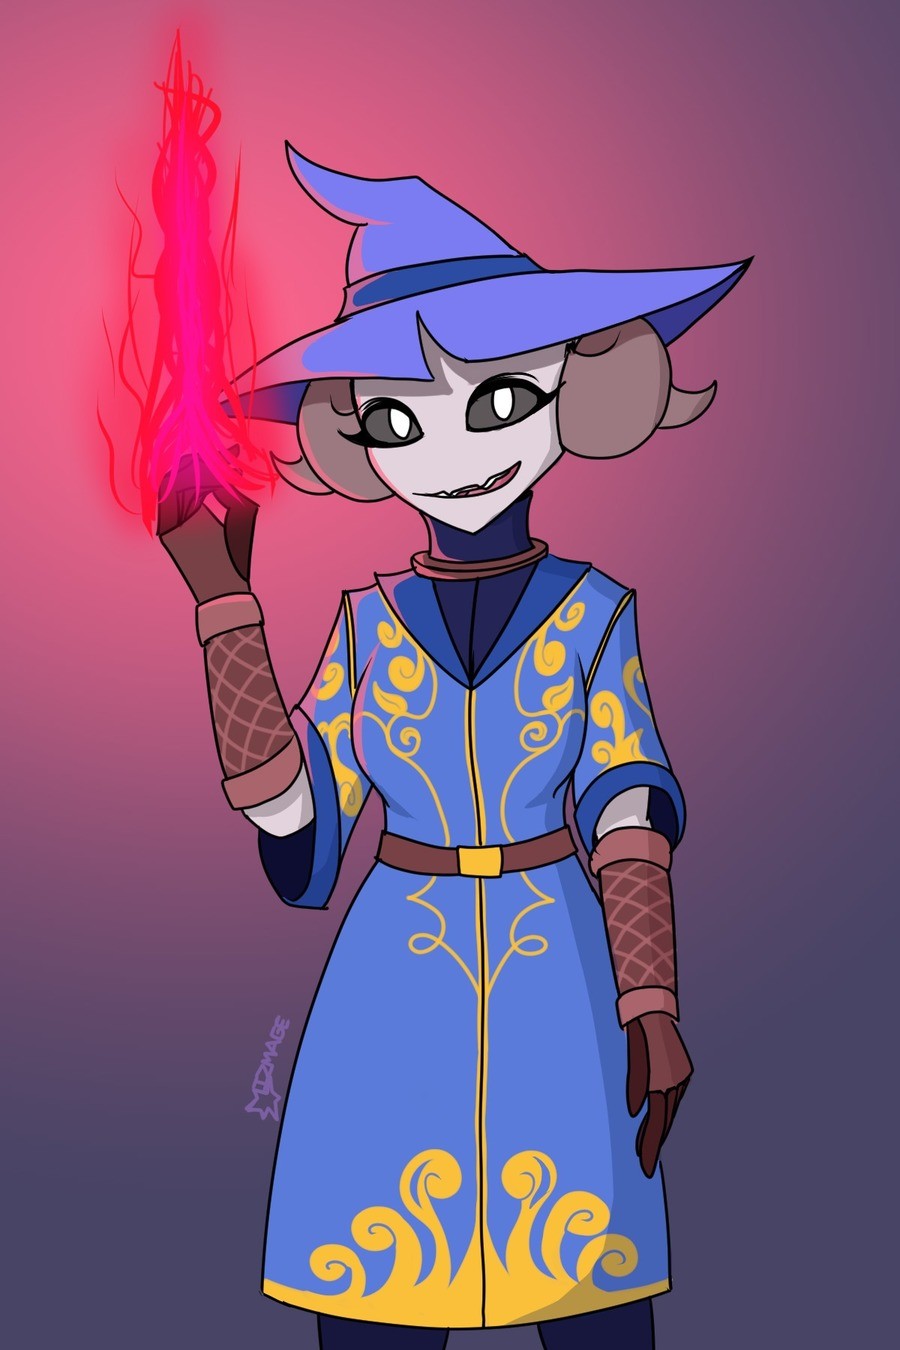 OC Art, Demorian Wizard. Its the Demorian Wizard girl! I've gone and decided to name her Alyeni, based off of absolutely nothing. Shes quite the powerful wizard